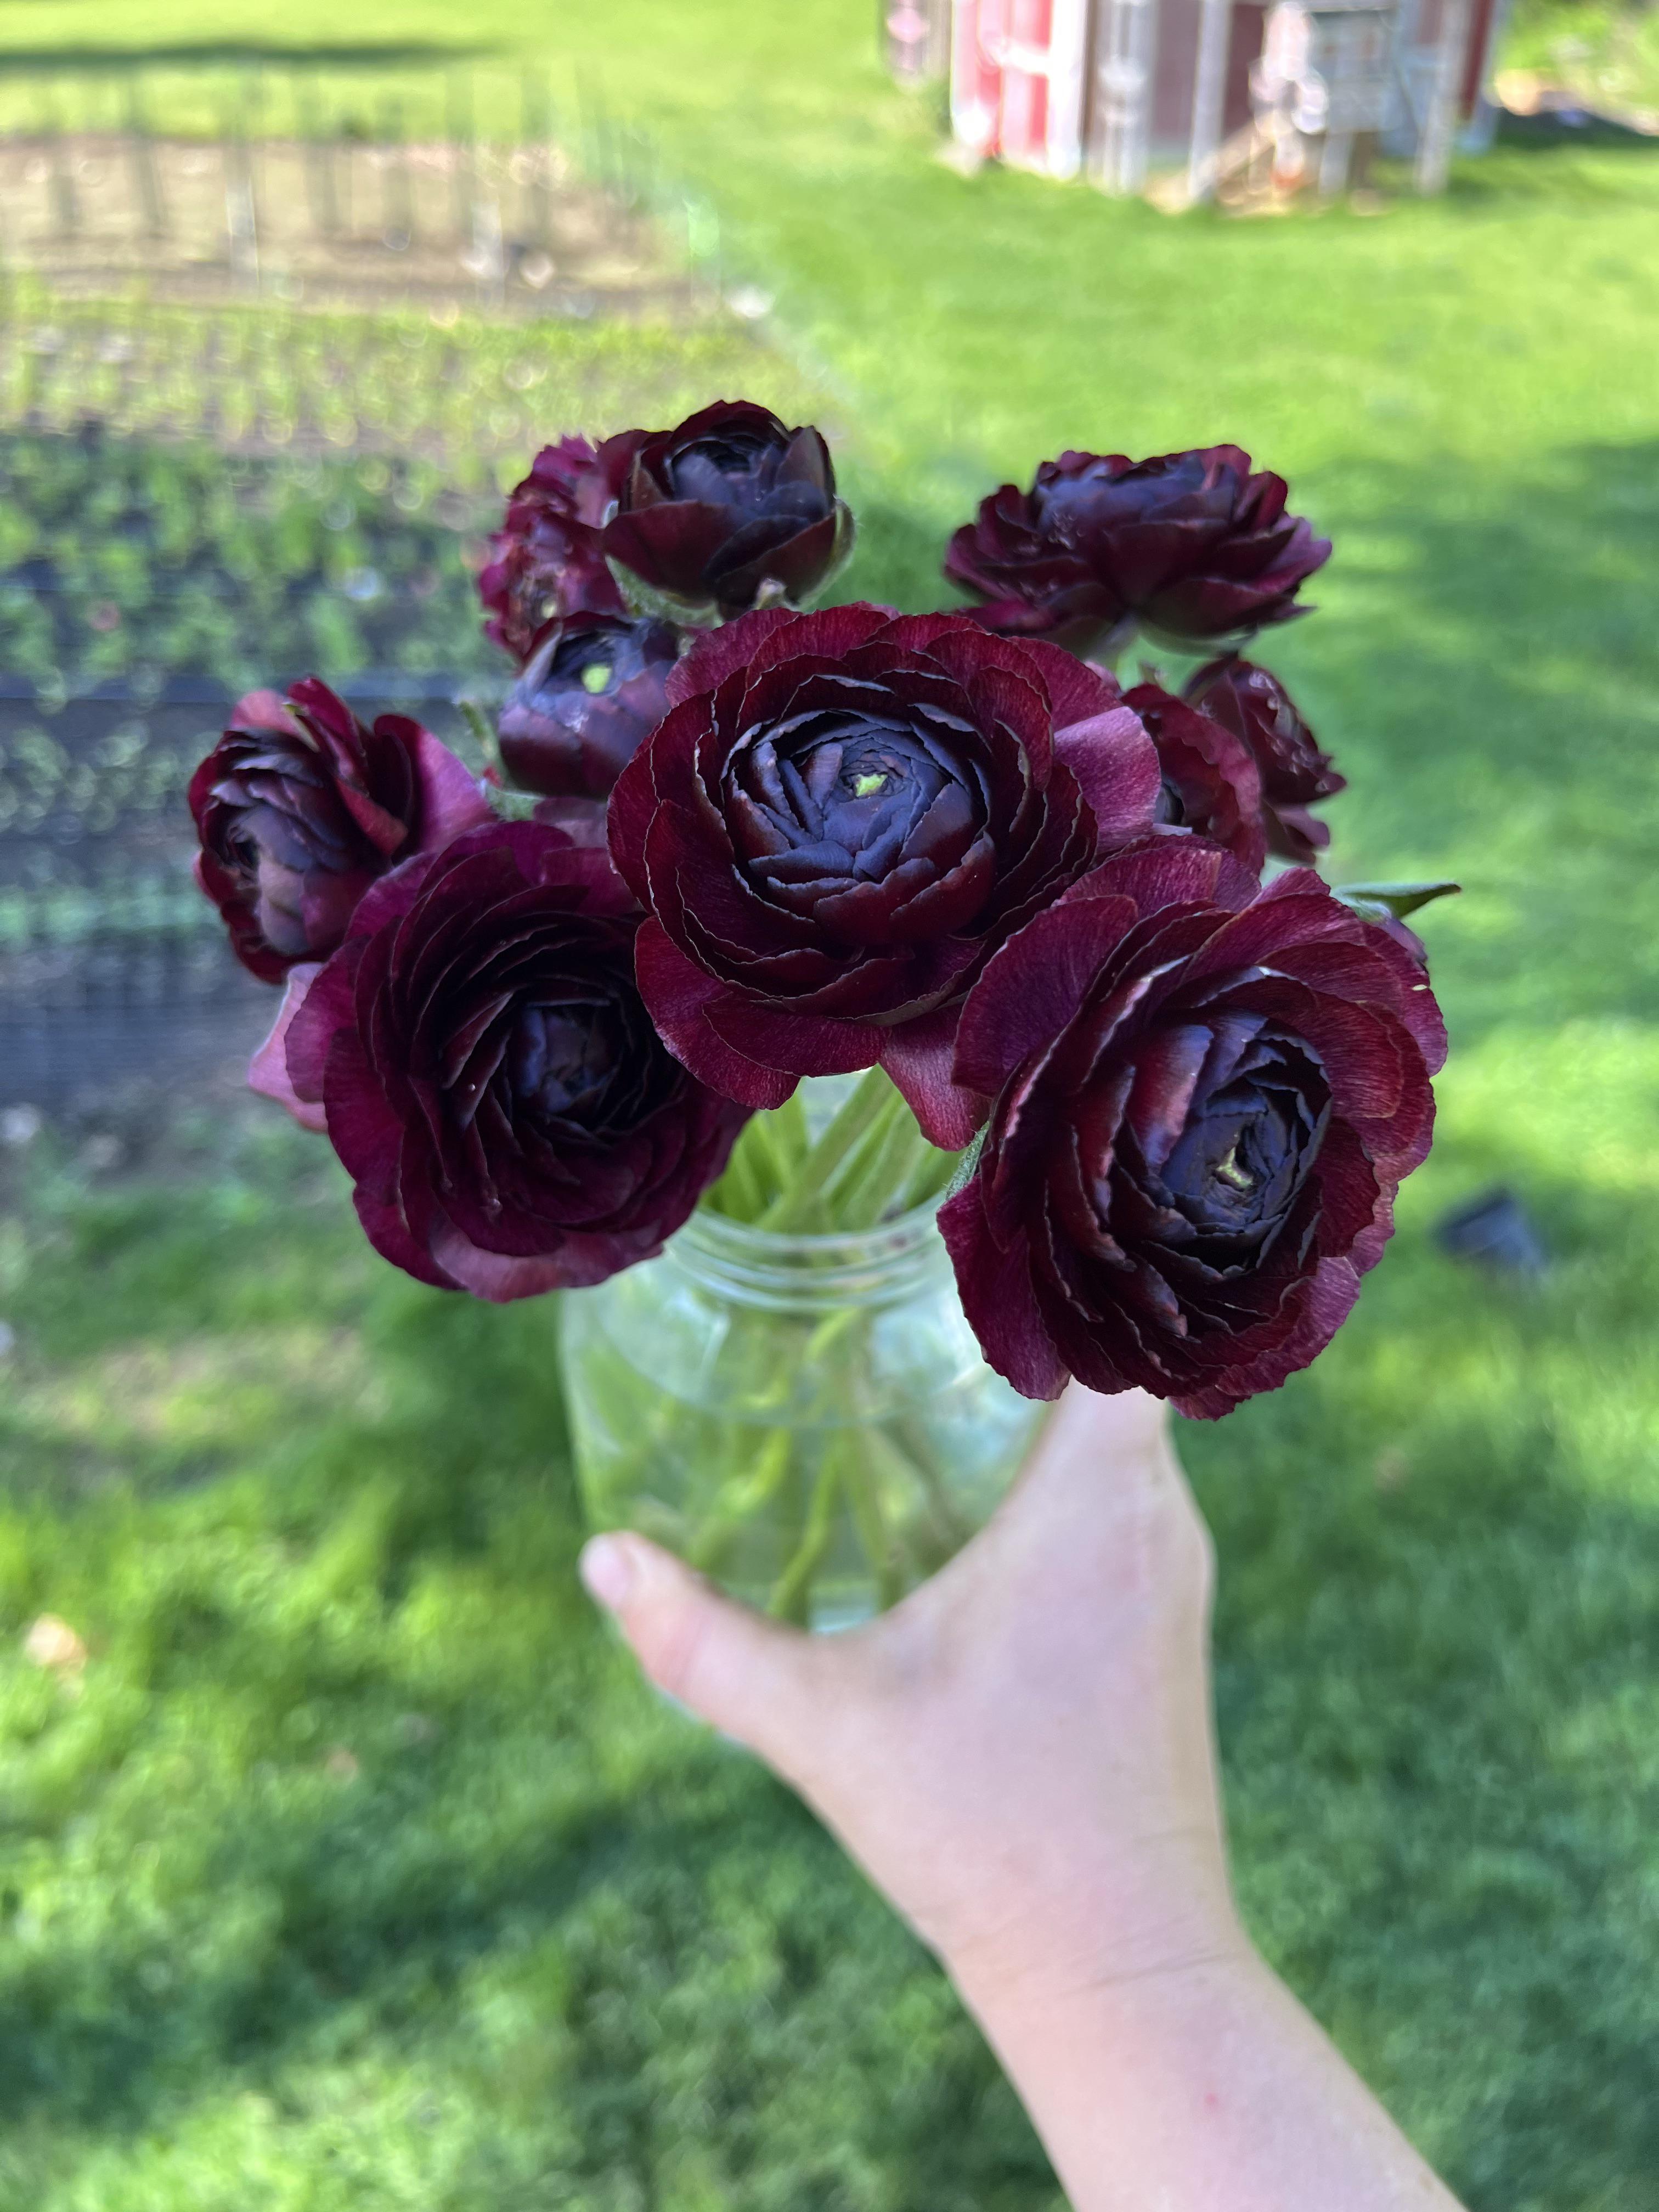 Ranunculus Flower Meaning: Youthful Beauty and Innocence